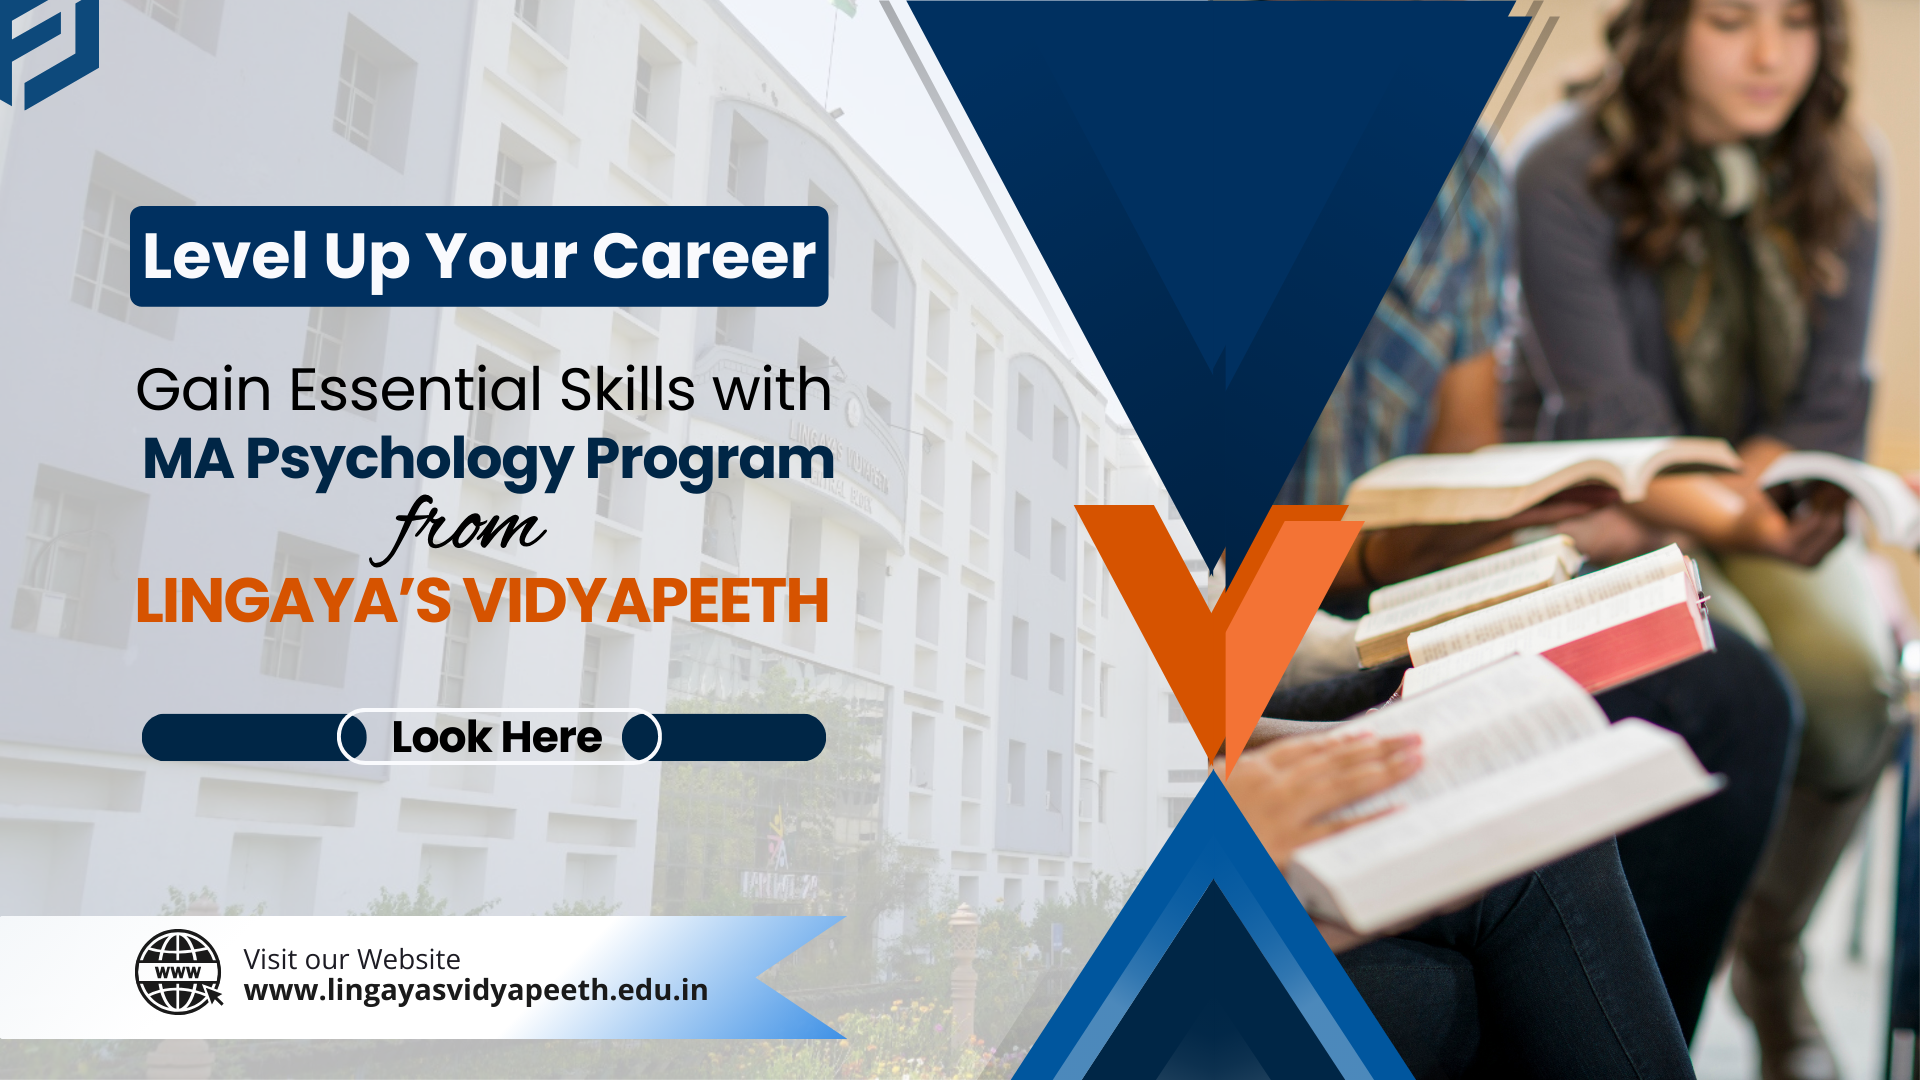 Level Up Your Career: Gain Essential Skills with MA Psychology Program